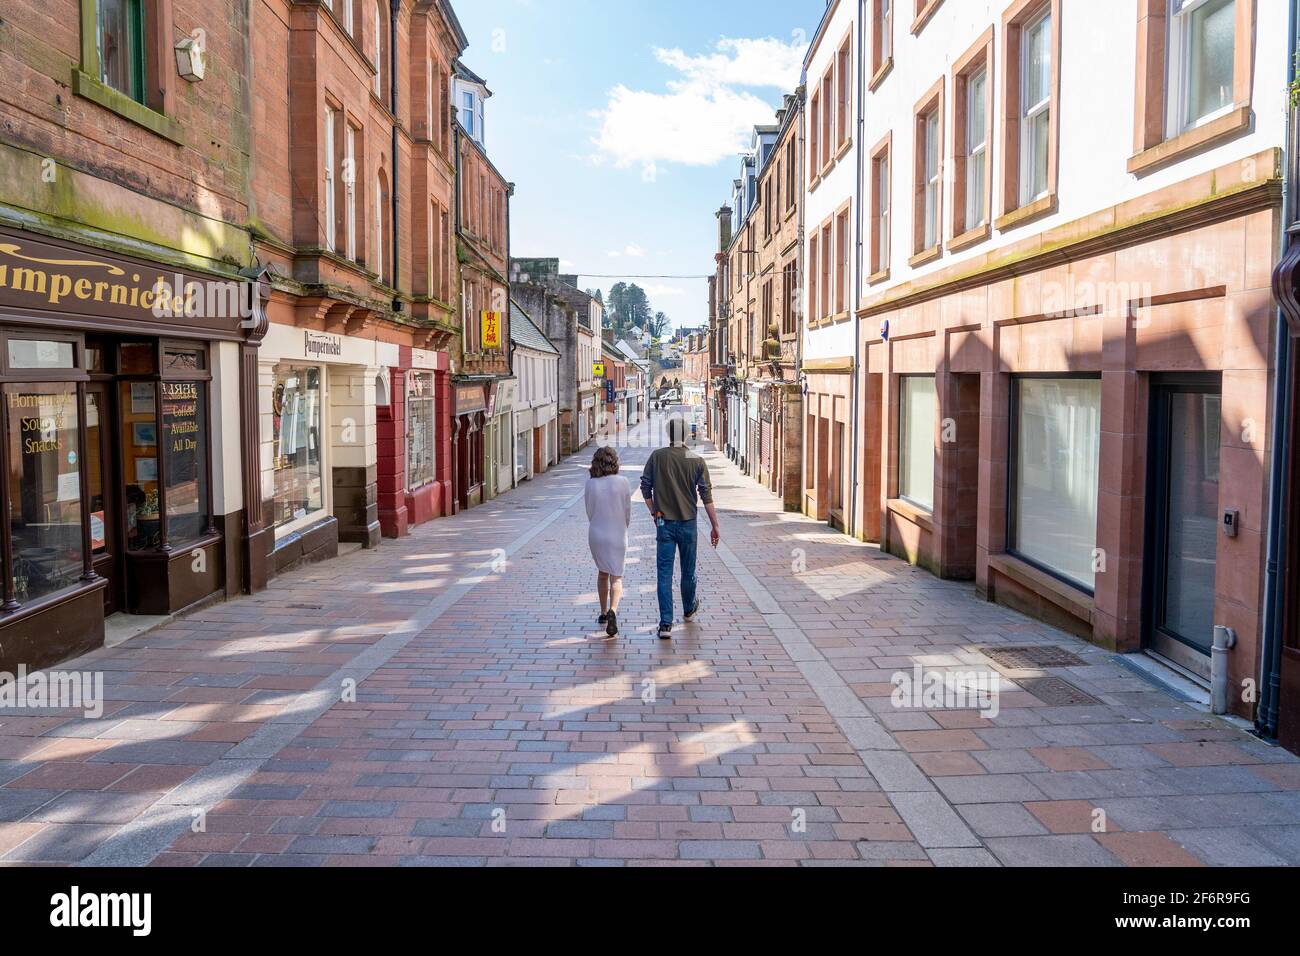 Dumfries, Scotland, UK. 2 April 2021. On the day when Scottish Government relaxes lockdown rules from “Stay at Home” to “Stay Local” the shopping streets of Dumfries town centre remain almost deserted with virtually no shops or businesses trading. Pic; Friars Vennel is lined with shops and cafes but is almost deserted on Friday afternoon because none are open. Iain Masterton/Alamy Live News Stock Photo